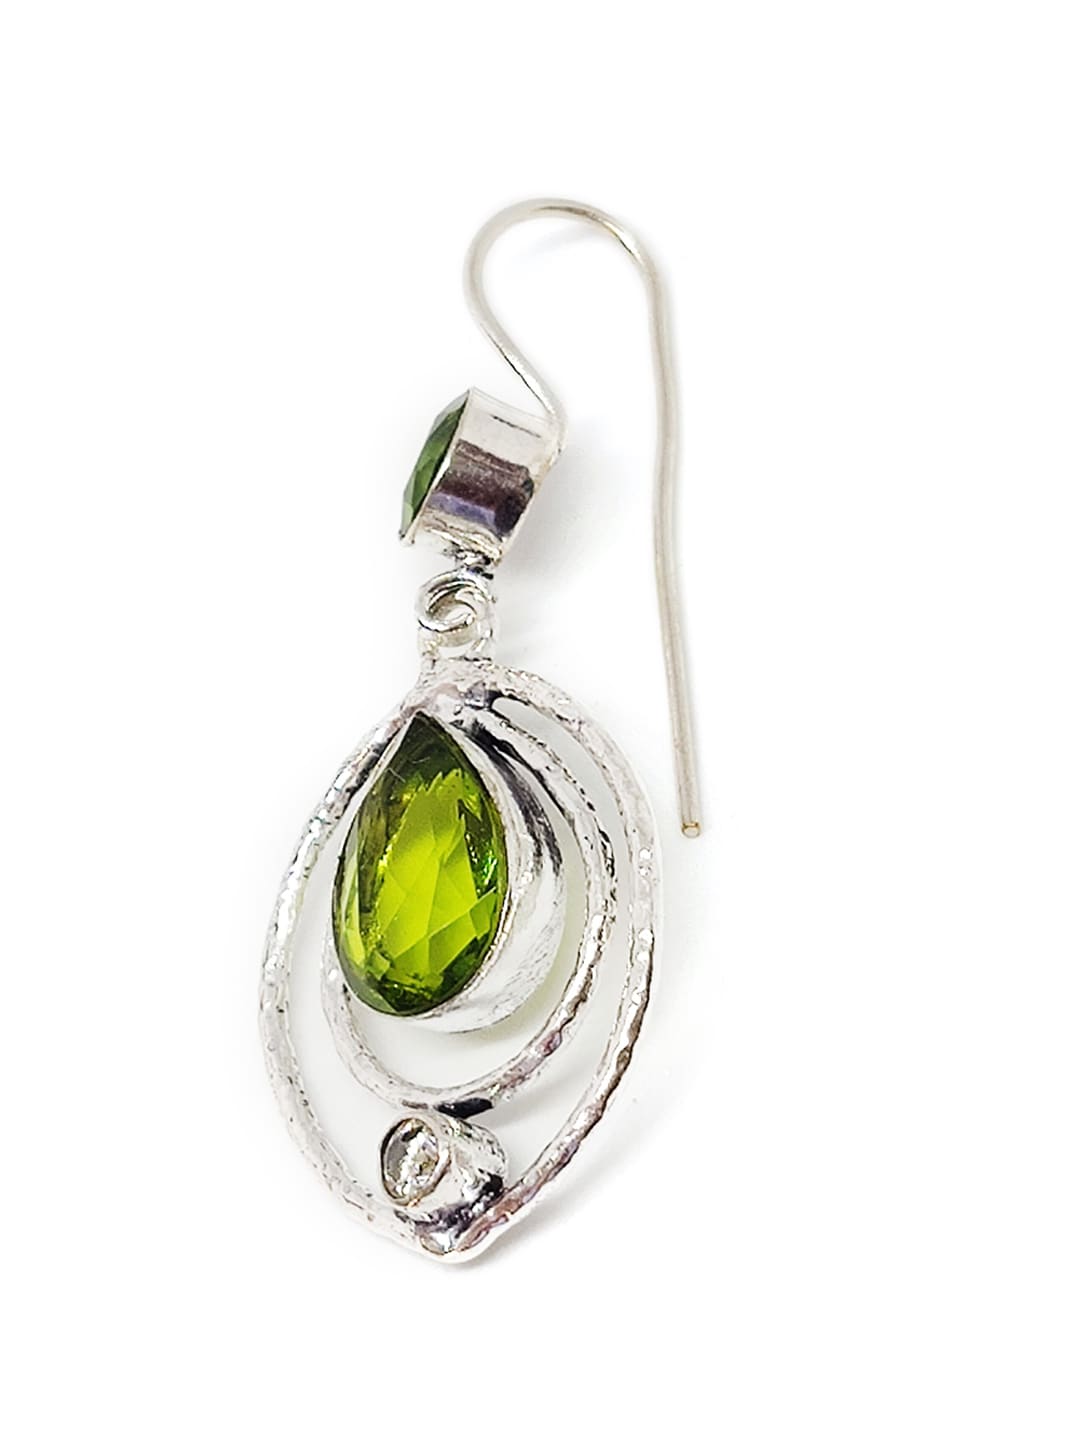 EL REGALO Green Contemporary Drop Earrings - for Women and Girls
Style ID: 16770270